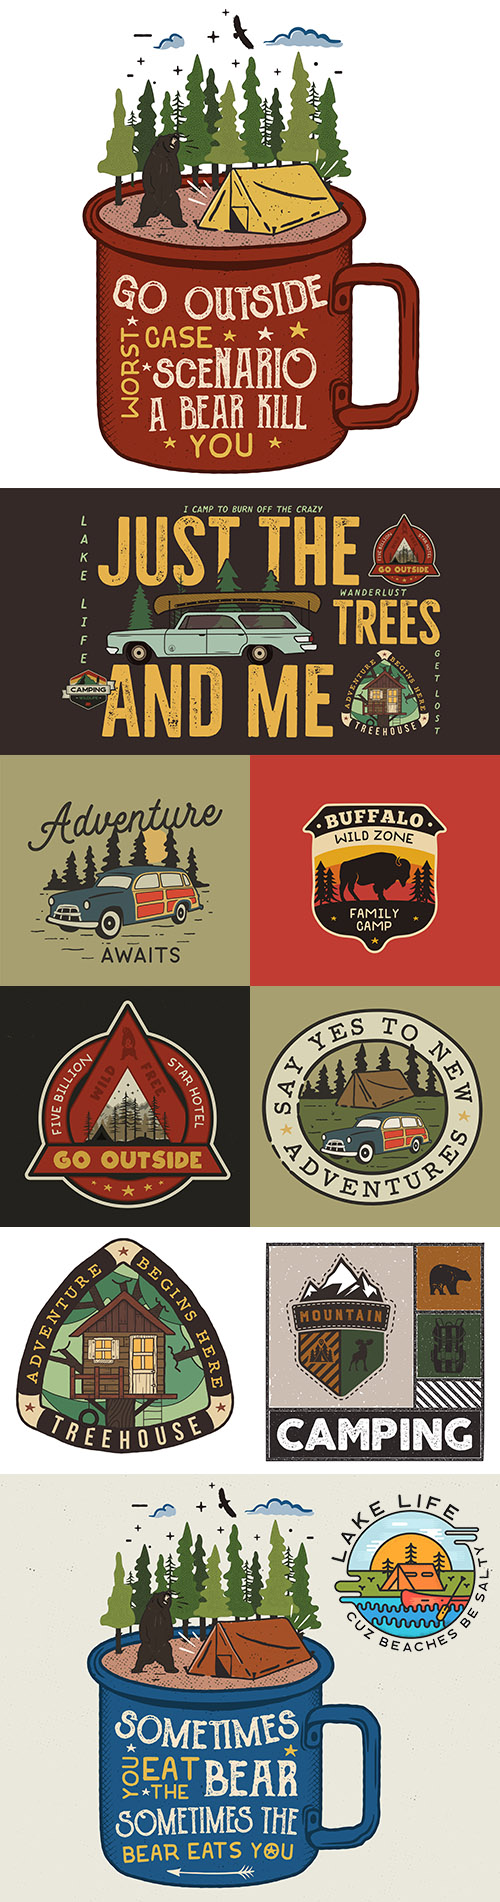 Camping badge design and adventure logo with quote
